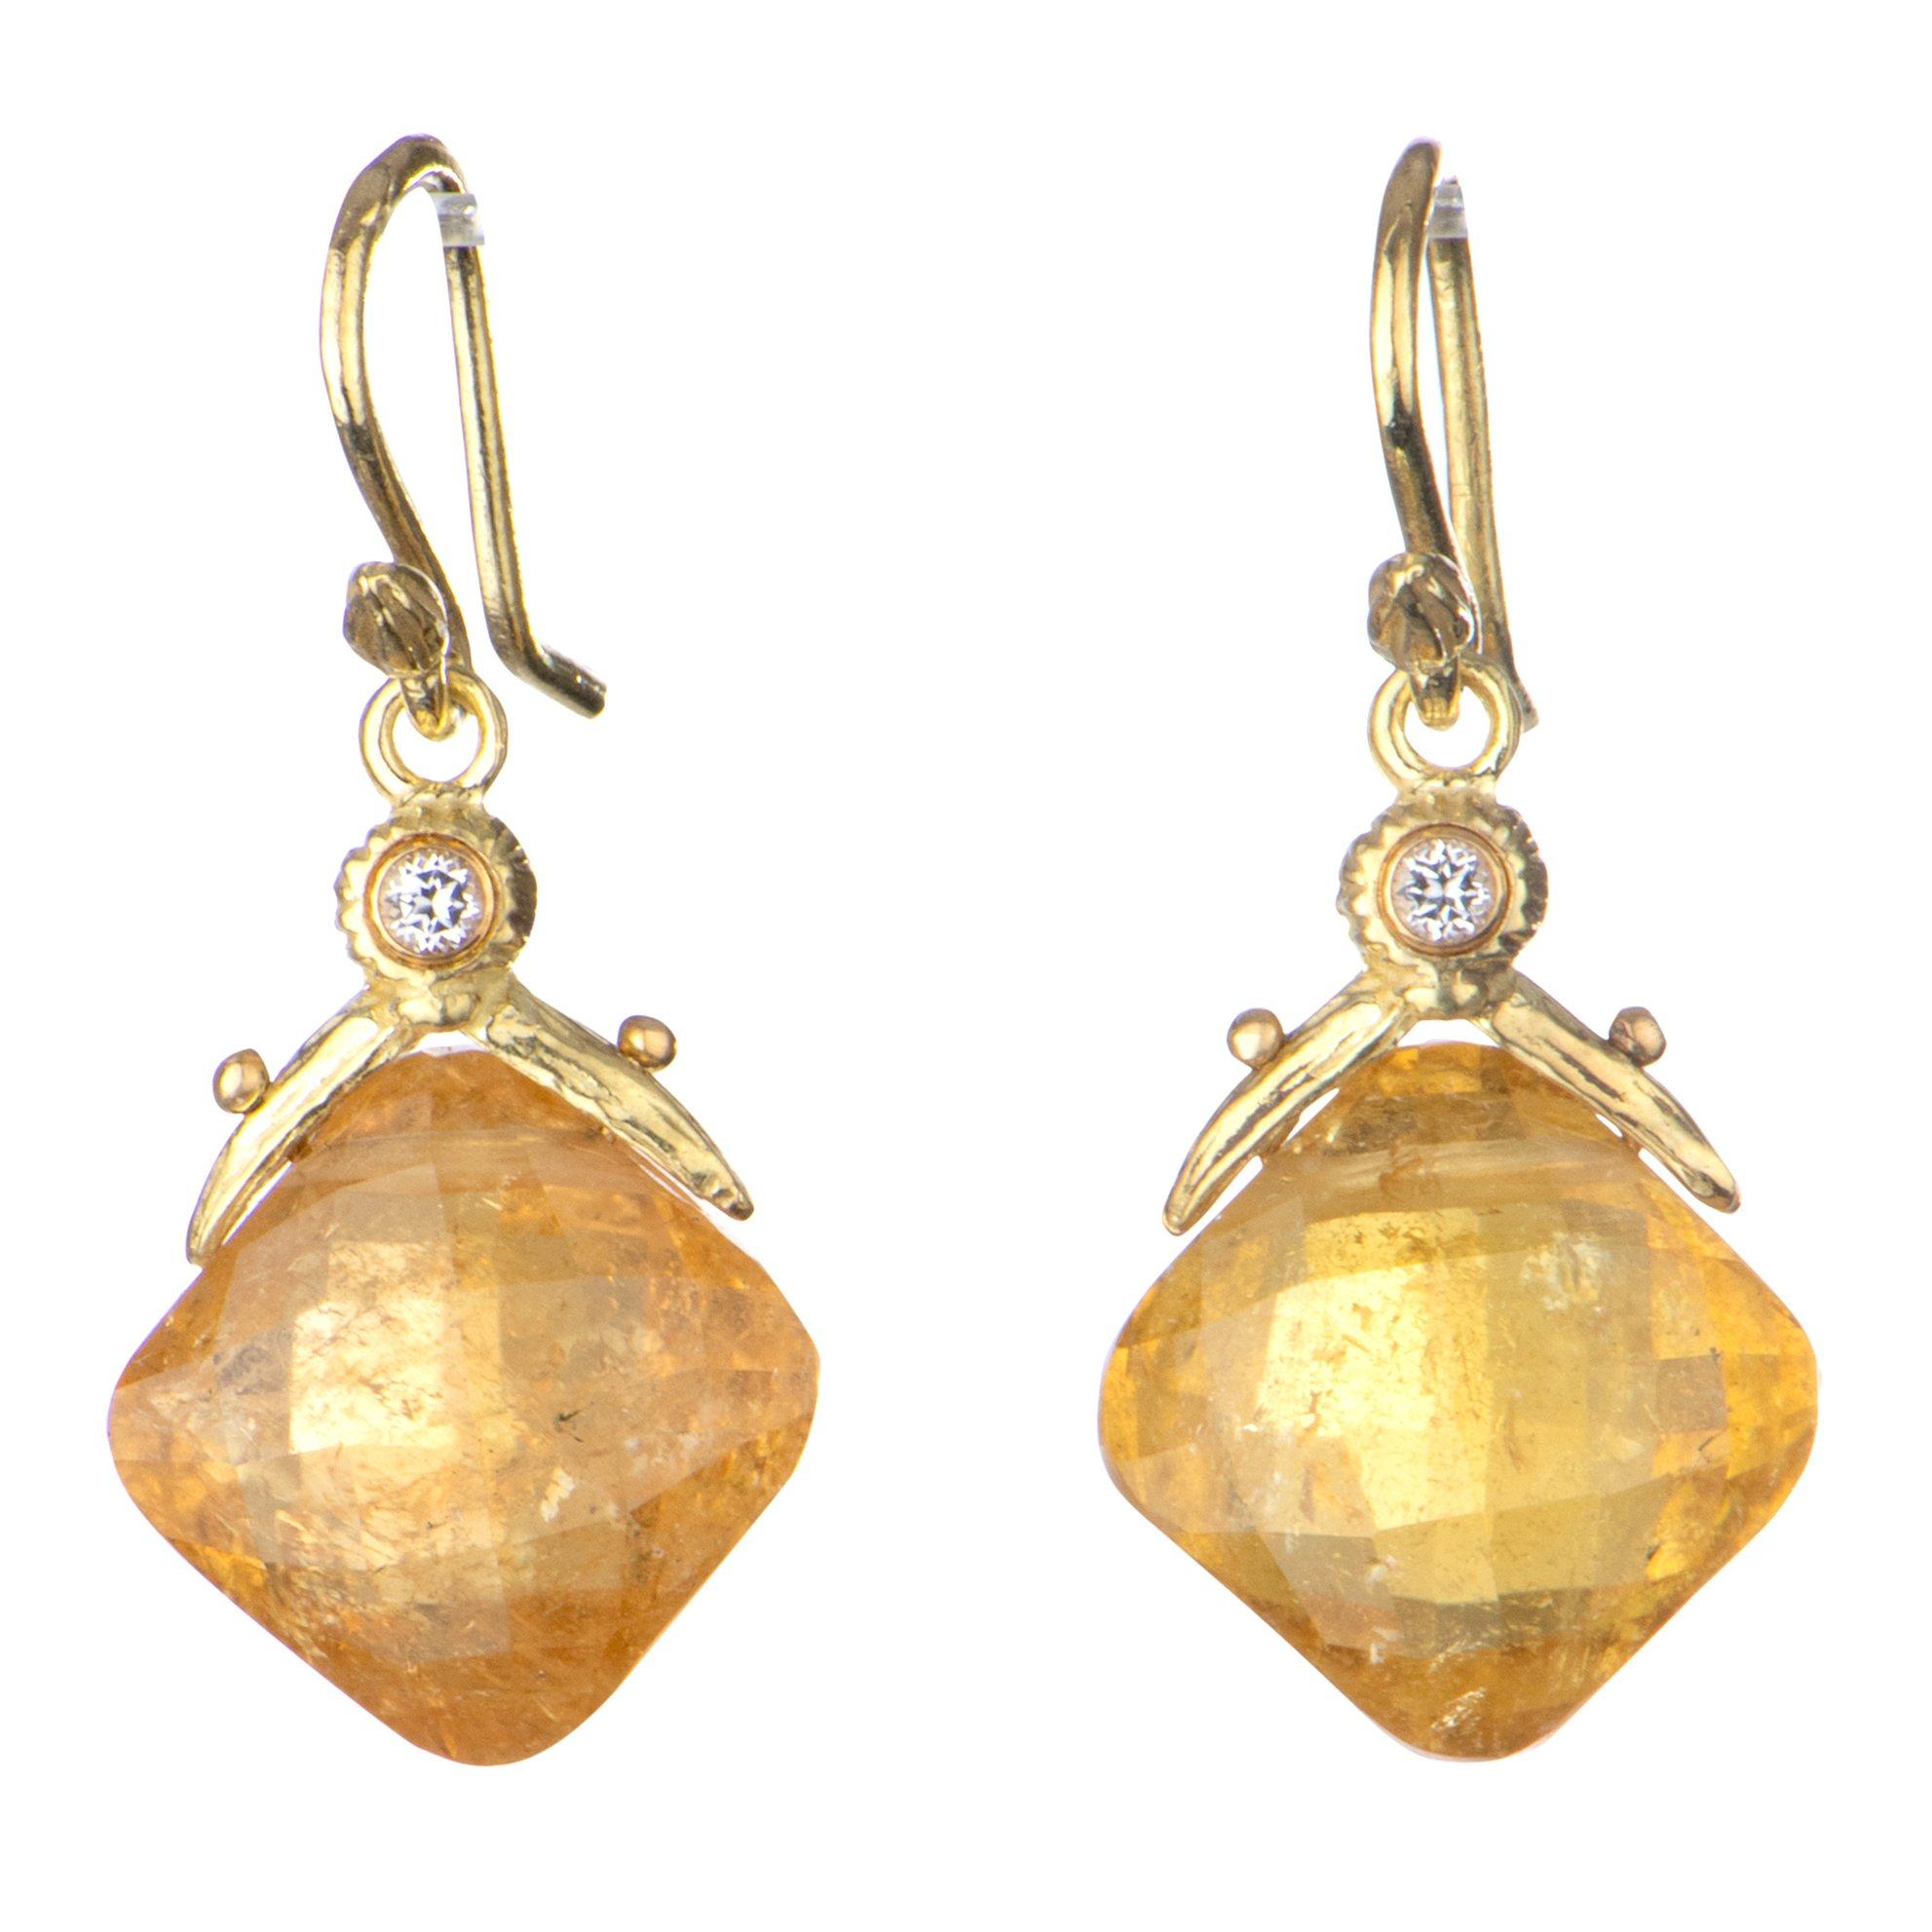 Rare golden spessartite cushion garnets are grandly showcased with their checkerboard facets and white topaz-kissed 18k gold double-seed setting. Hung from French earwires for subtle movement and to catch the light into these stones' warm, fiery